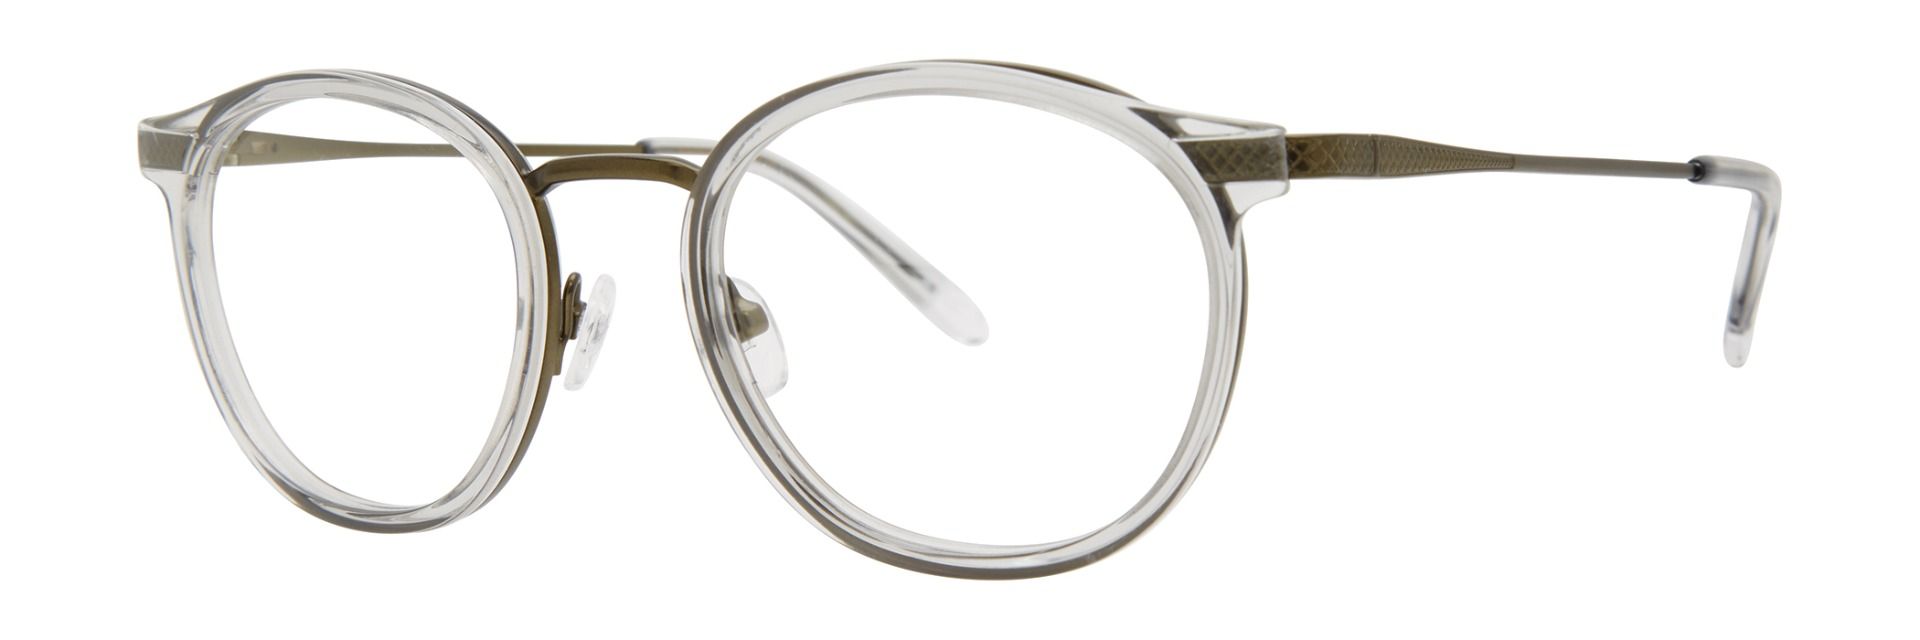 Men’s prescription eyewear - A side view of the Justin model in a clear metallic colour. The round frame is made of acetate and metal